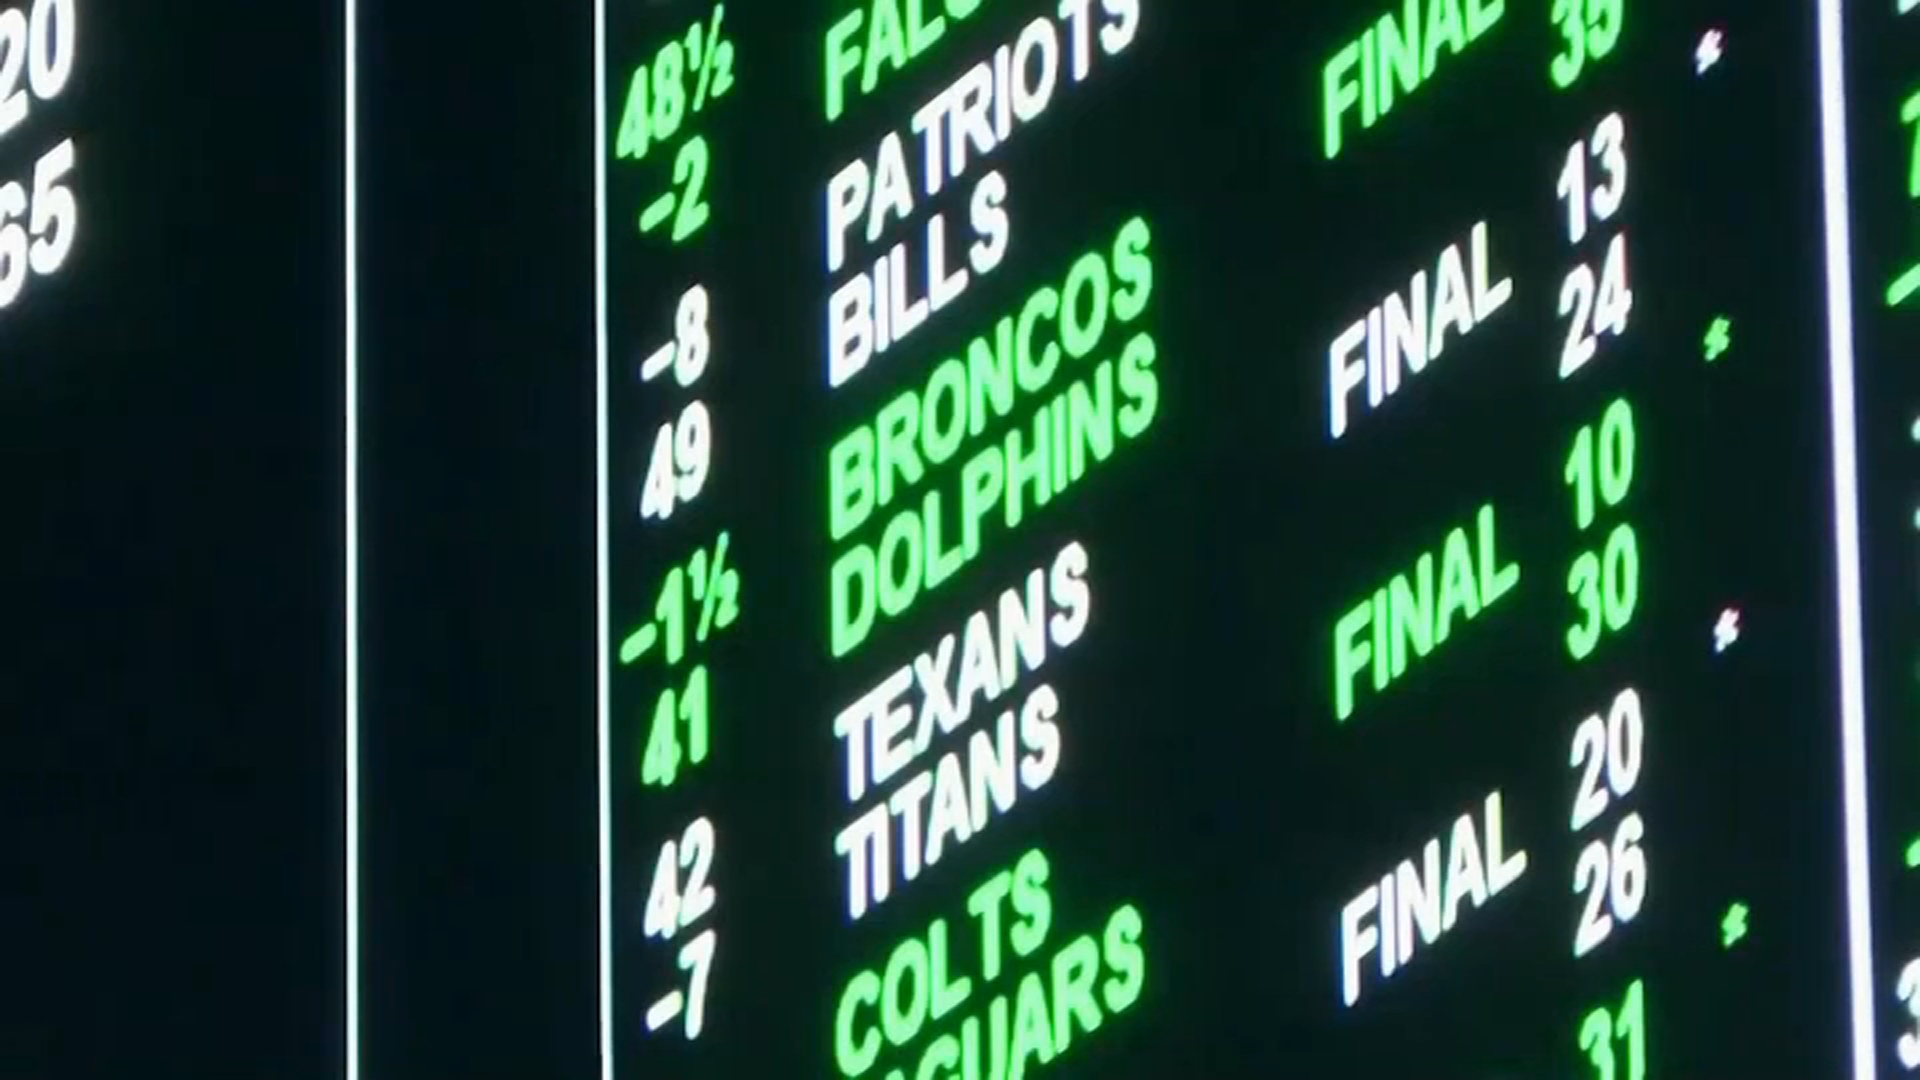 Sports Betting Officially Launches in Maine on Friday” – NECN